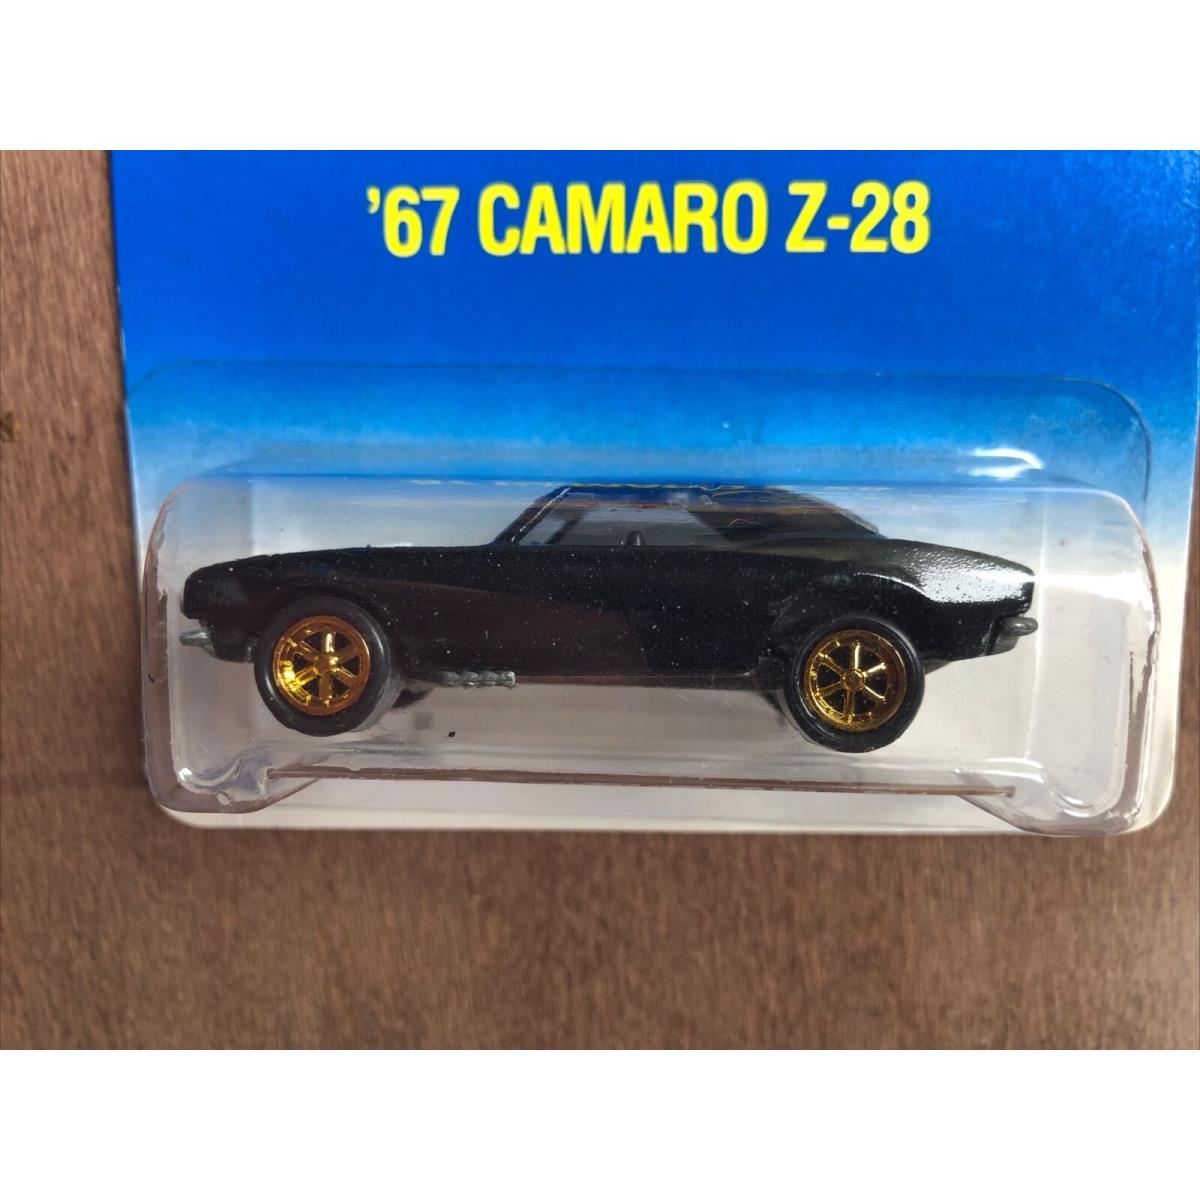 Hot Wheels 1993 Greater Seattle Toy Show `67 Camaro Z-28 - Black Limited Edition